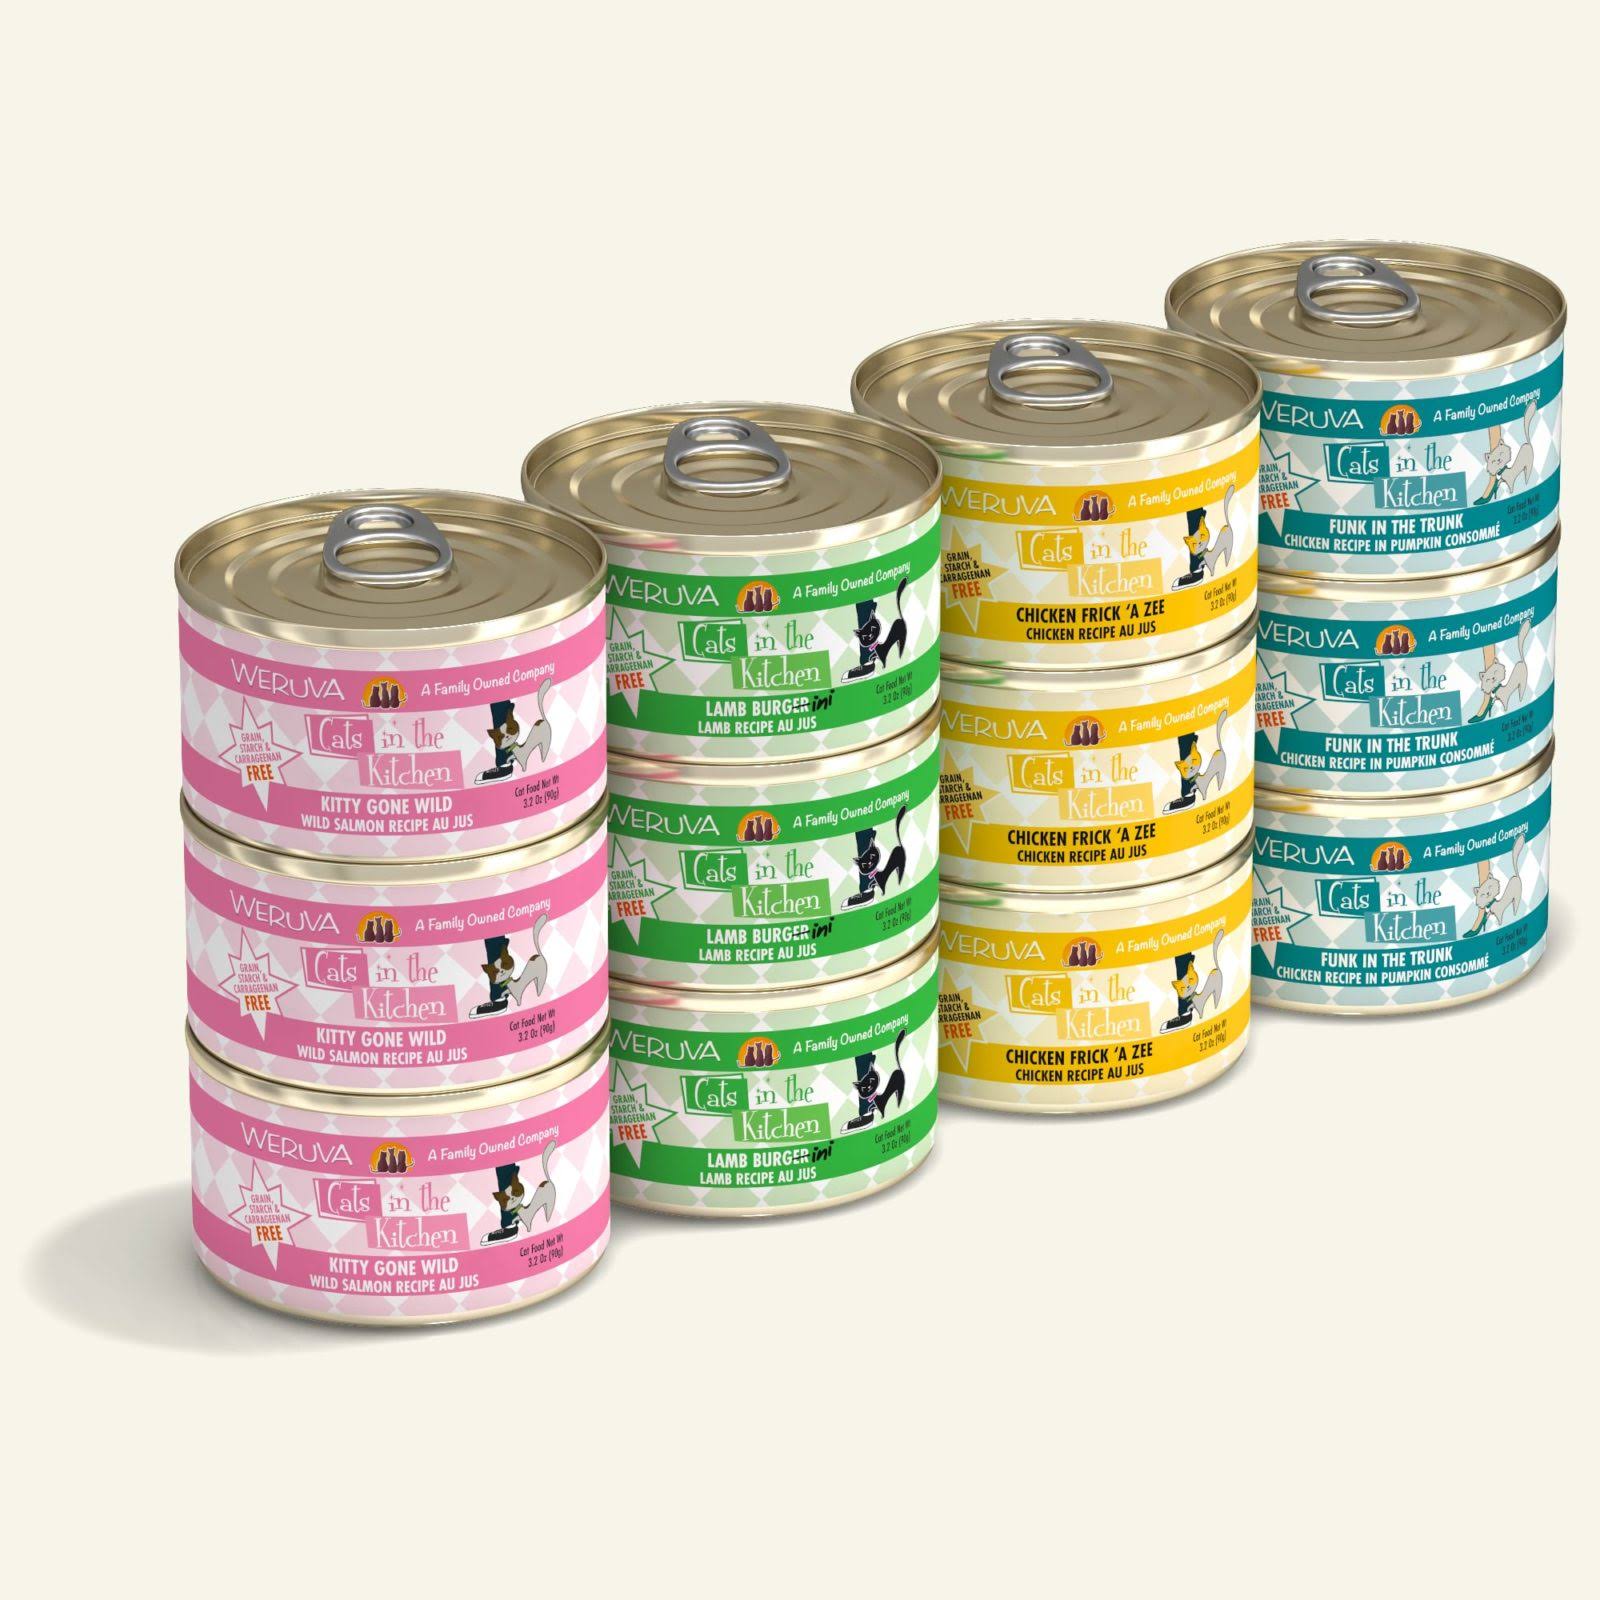 Weruva Grain Free Cats in The Kitchen Canned Variety Pack - 3 oz, Case of 12